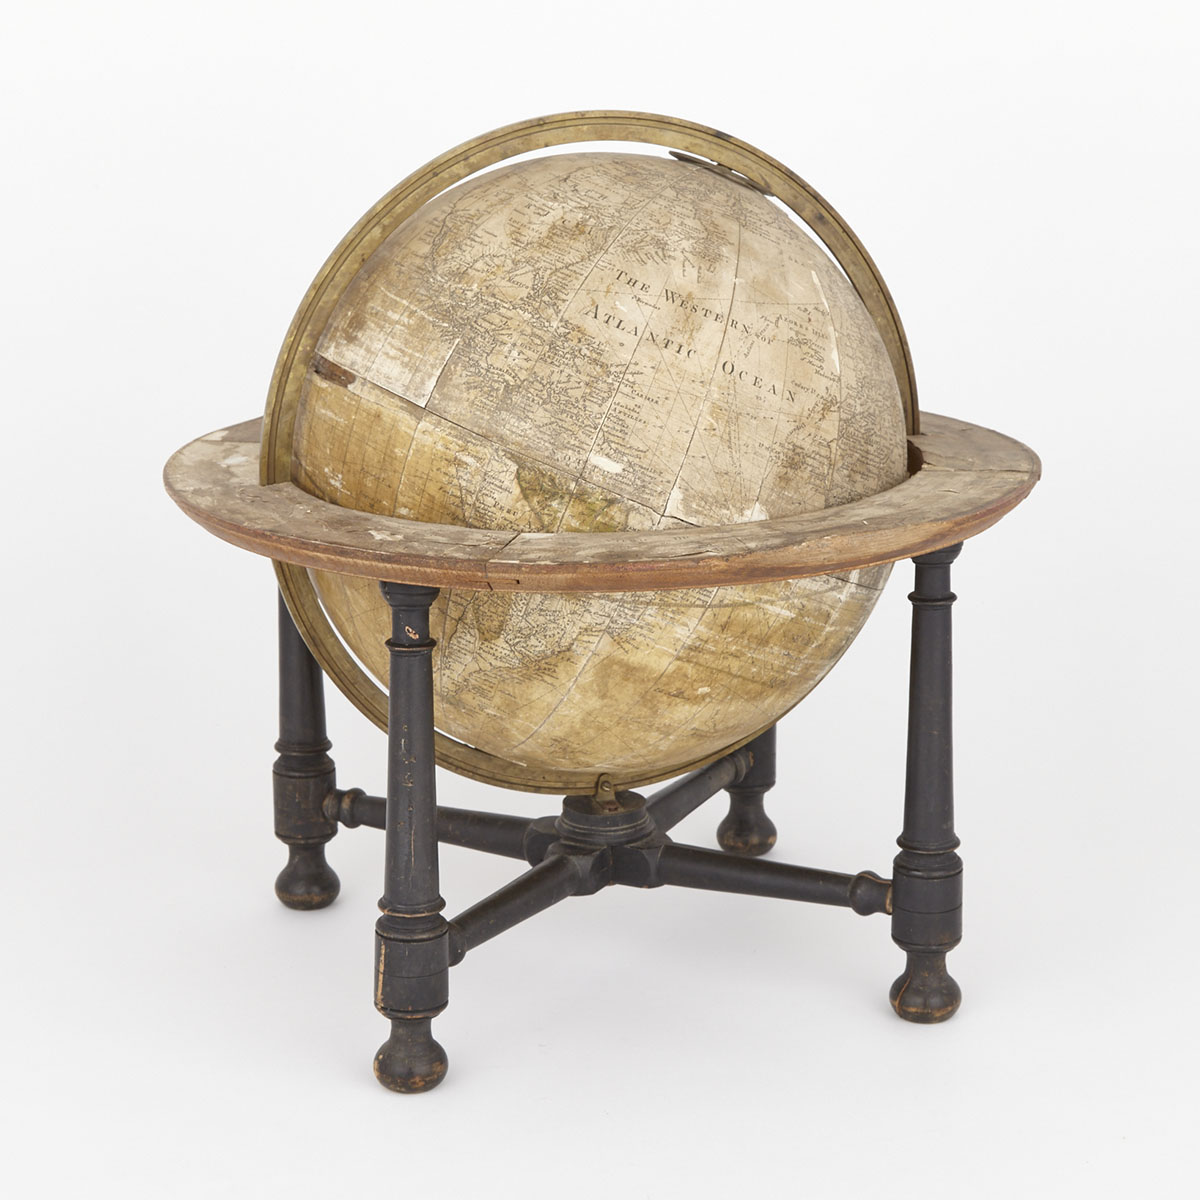 George III 12 Inch Terrestrial Library Globe on Stand, Dudley Adams, late 18th century